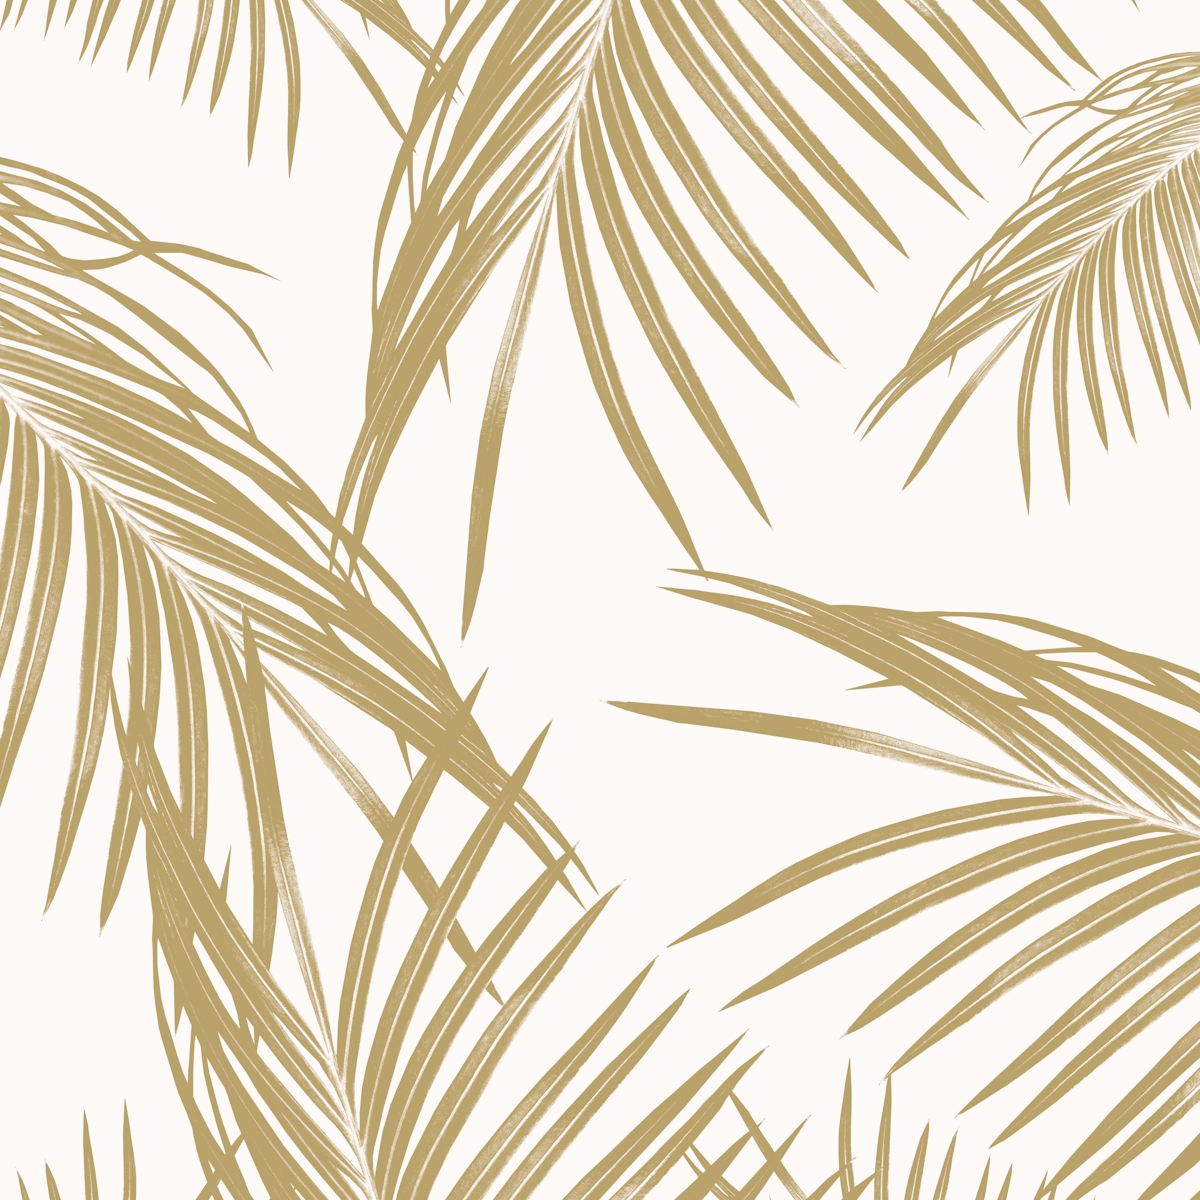 Buy Gold Palm Leaves Dream 1 wallpaper - Free shipping